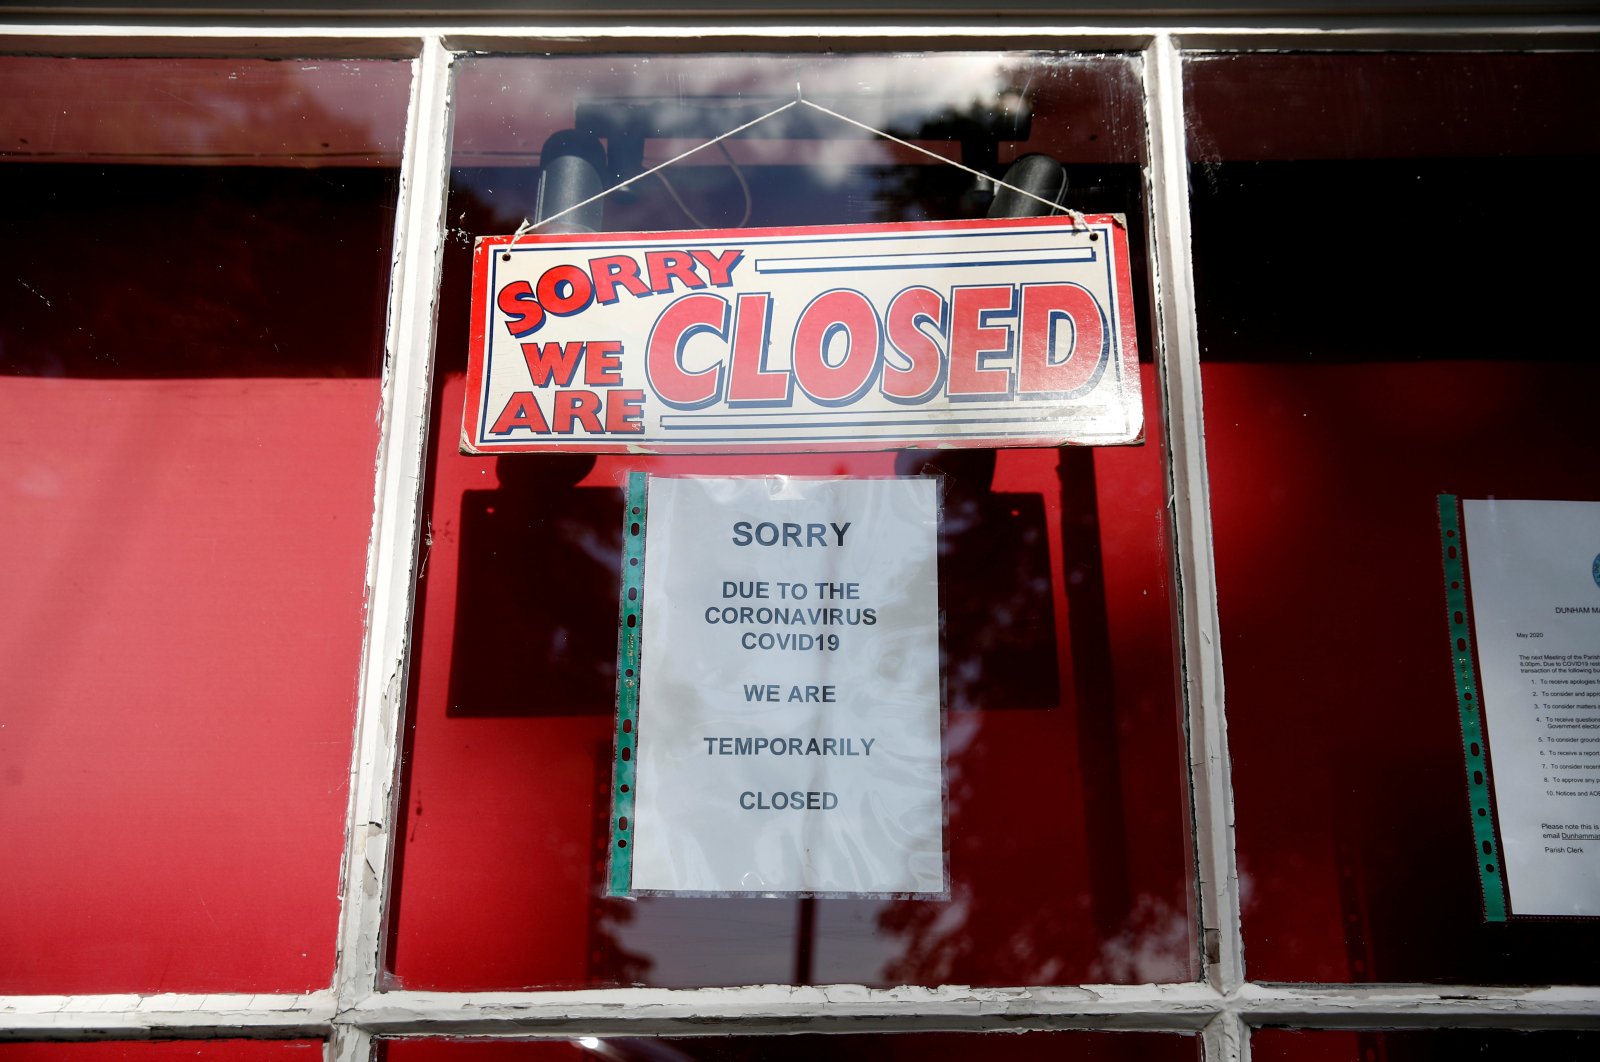 A closed sign is seen in a shop window in Dunham Massey, following the outbreak of the coronavirus disease, Dunham Massey, Britain, May 7, 2020. (Reuters Photo)